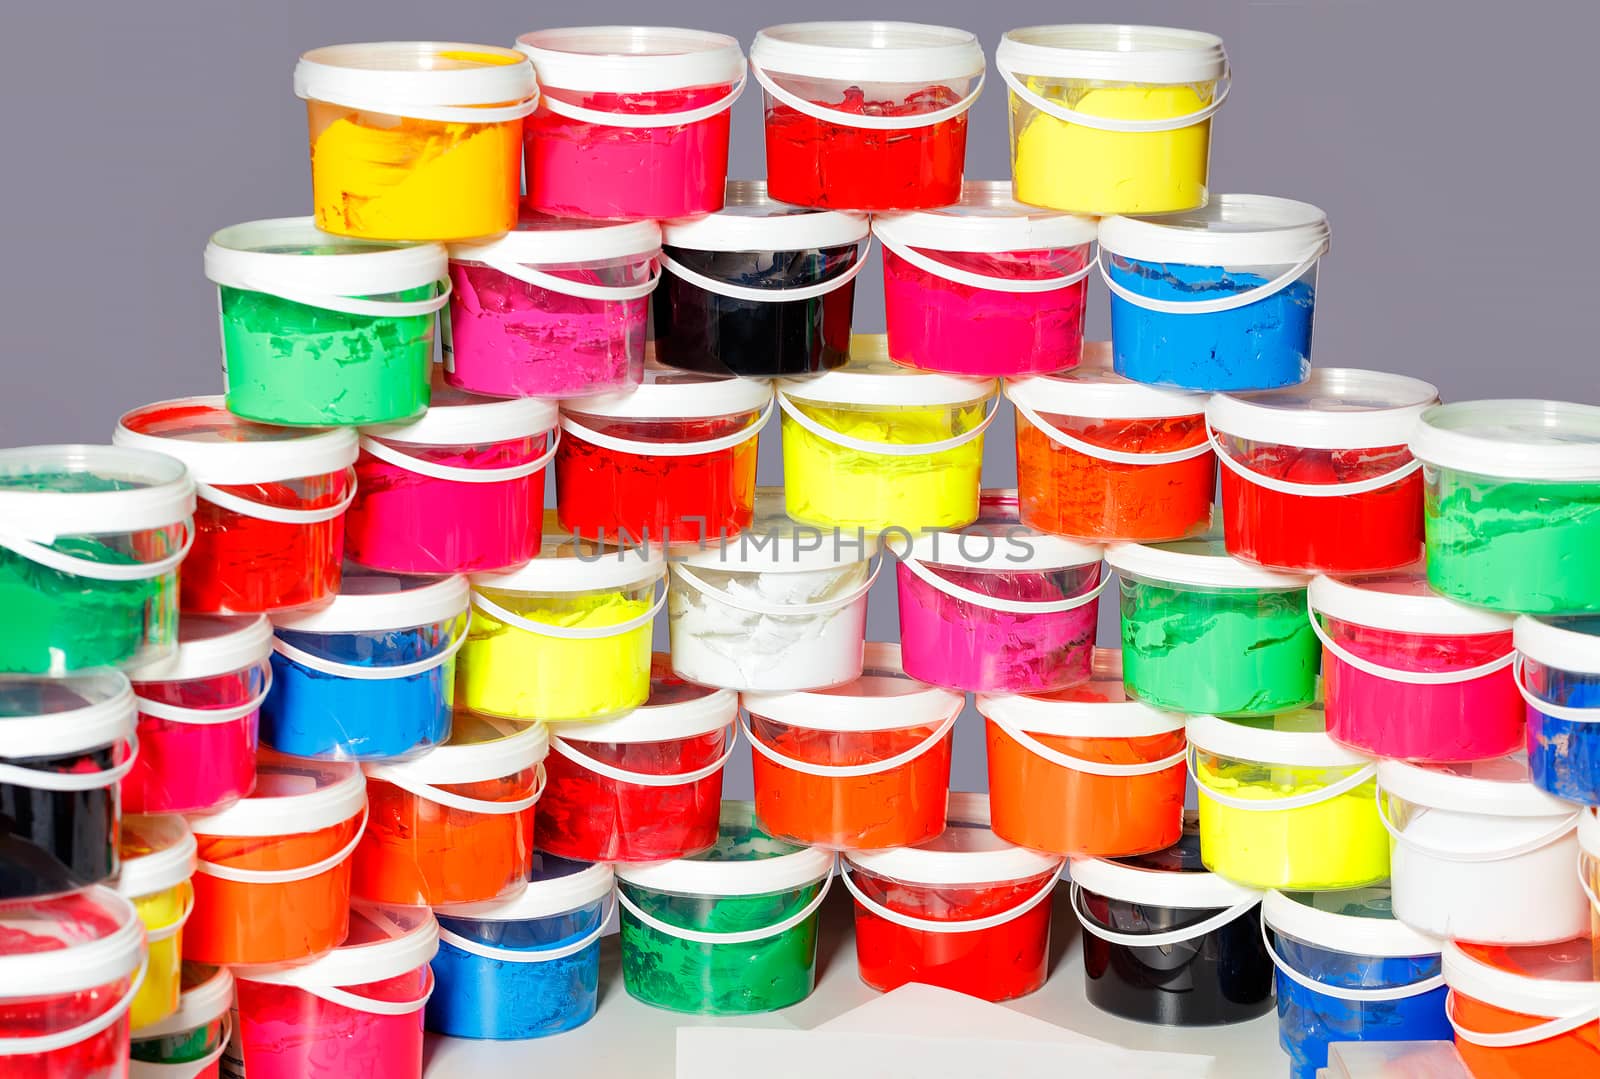 Screen-printing ink in a variety of vibrant colorsin clear plastic containers. by Sergii